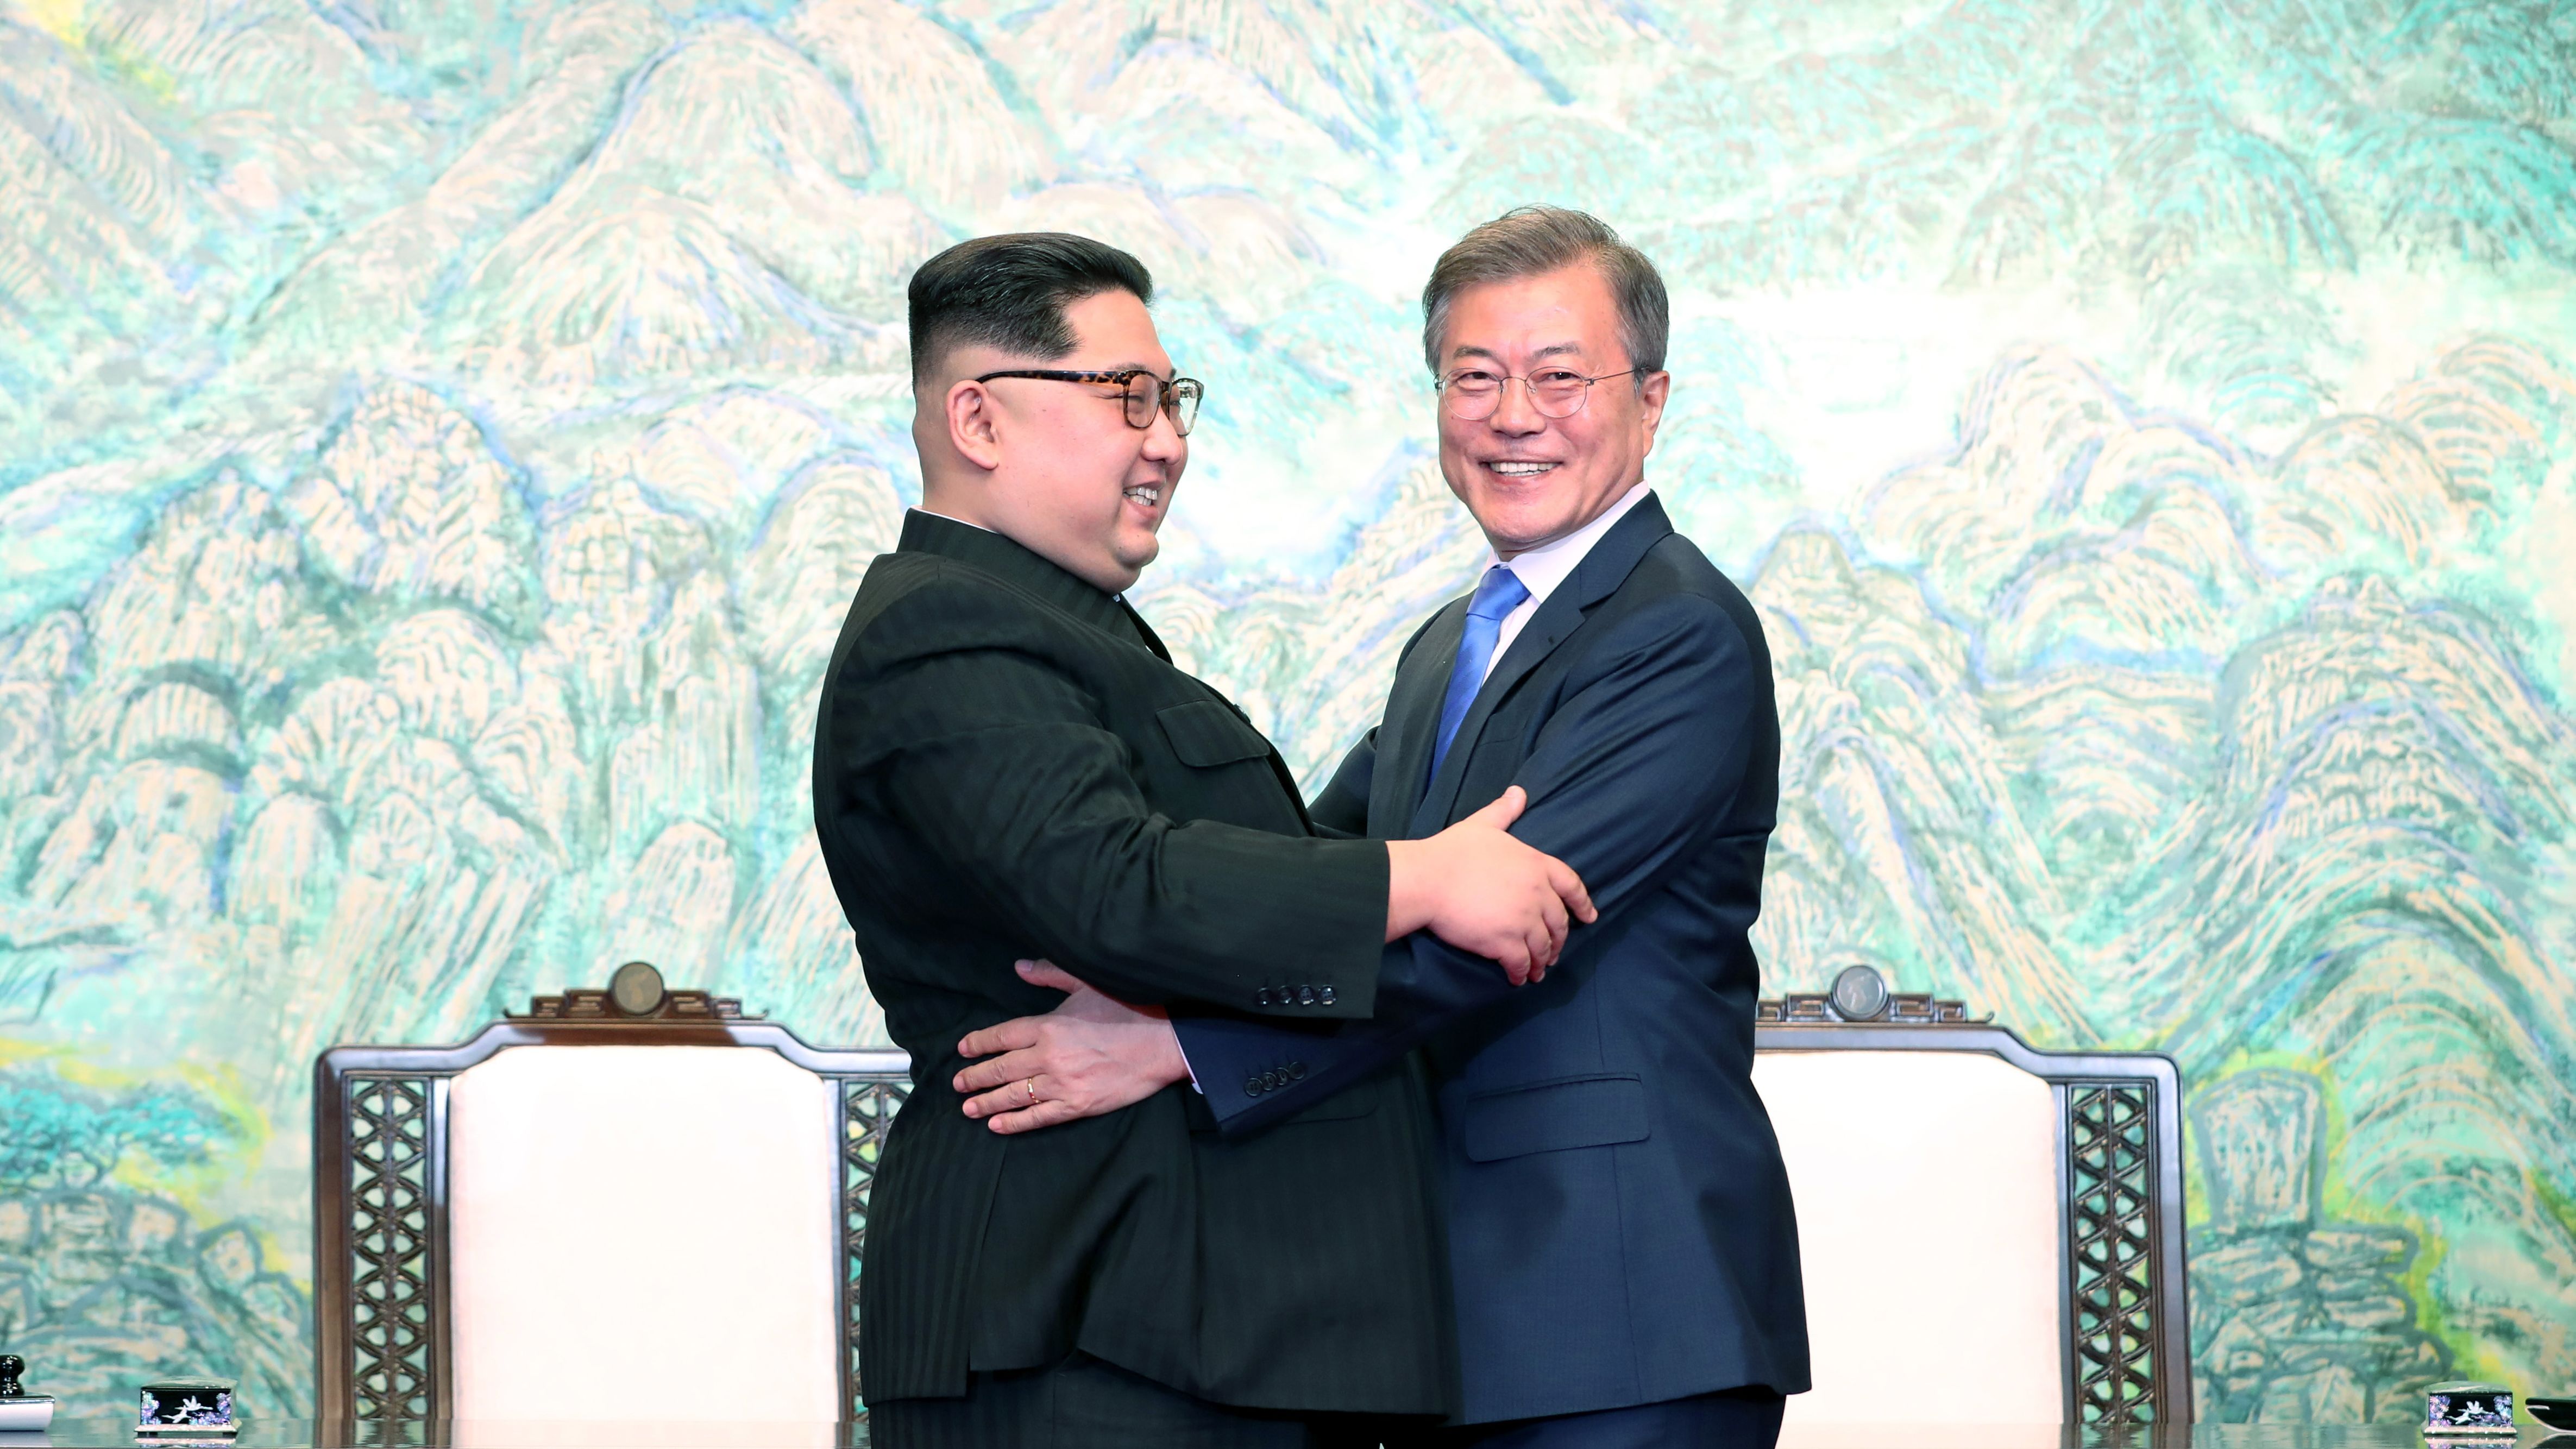 North Korean leader Kim Jong Un and South Korean President Moon Jae-in  embrace at a summit in South Korea in April.